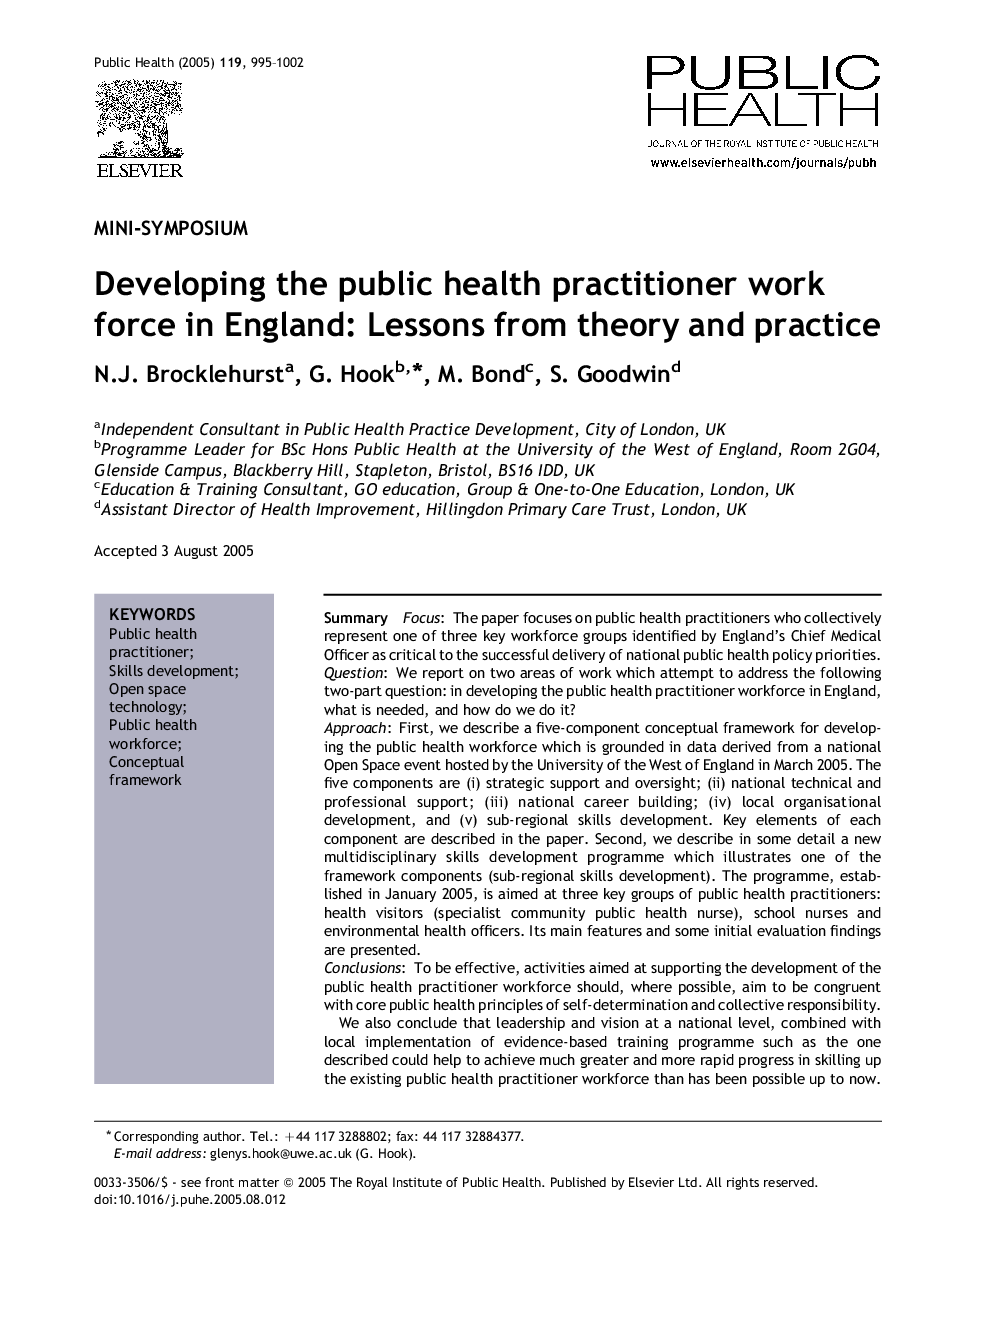 Developing the public health practitioner workforce in England: Lessons from theory and practice